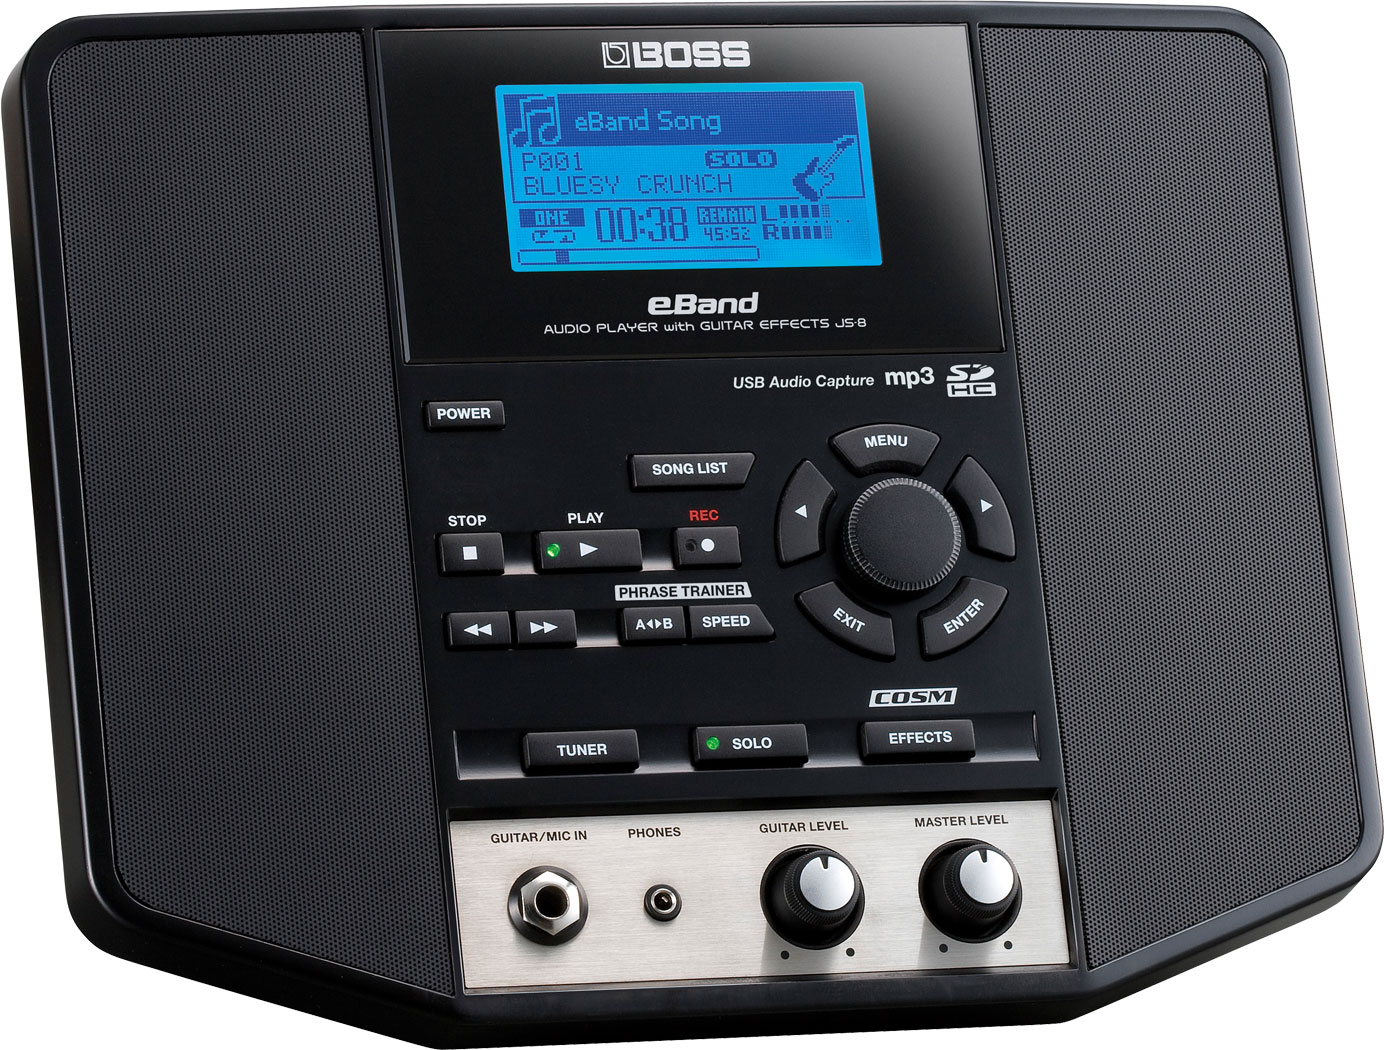 BOSS - eBand JS-8 | Audio Player with Guitar Effects